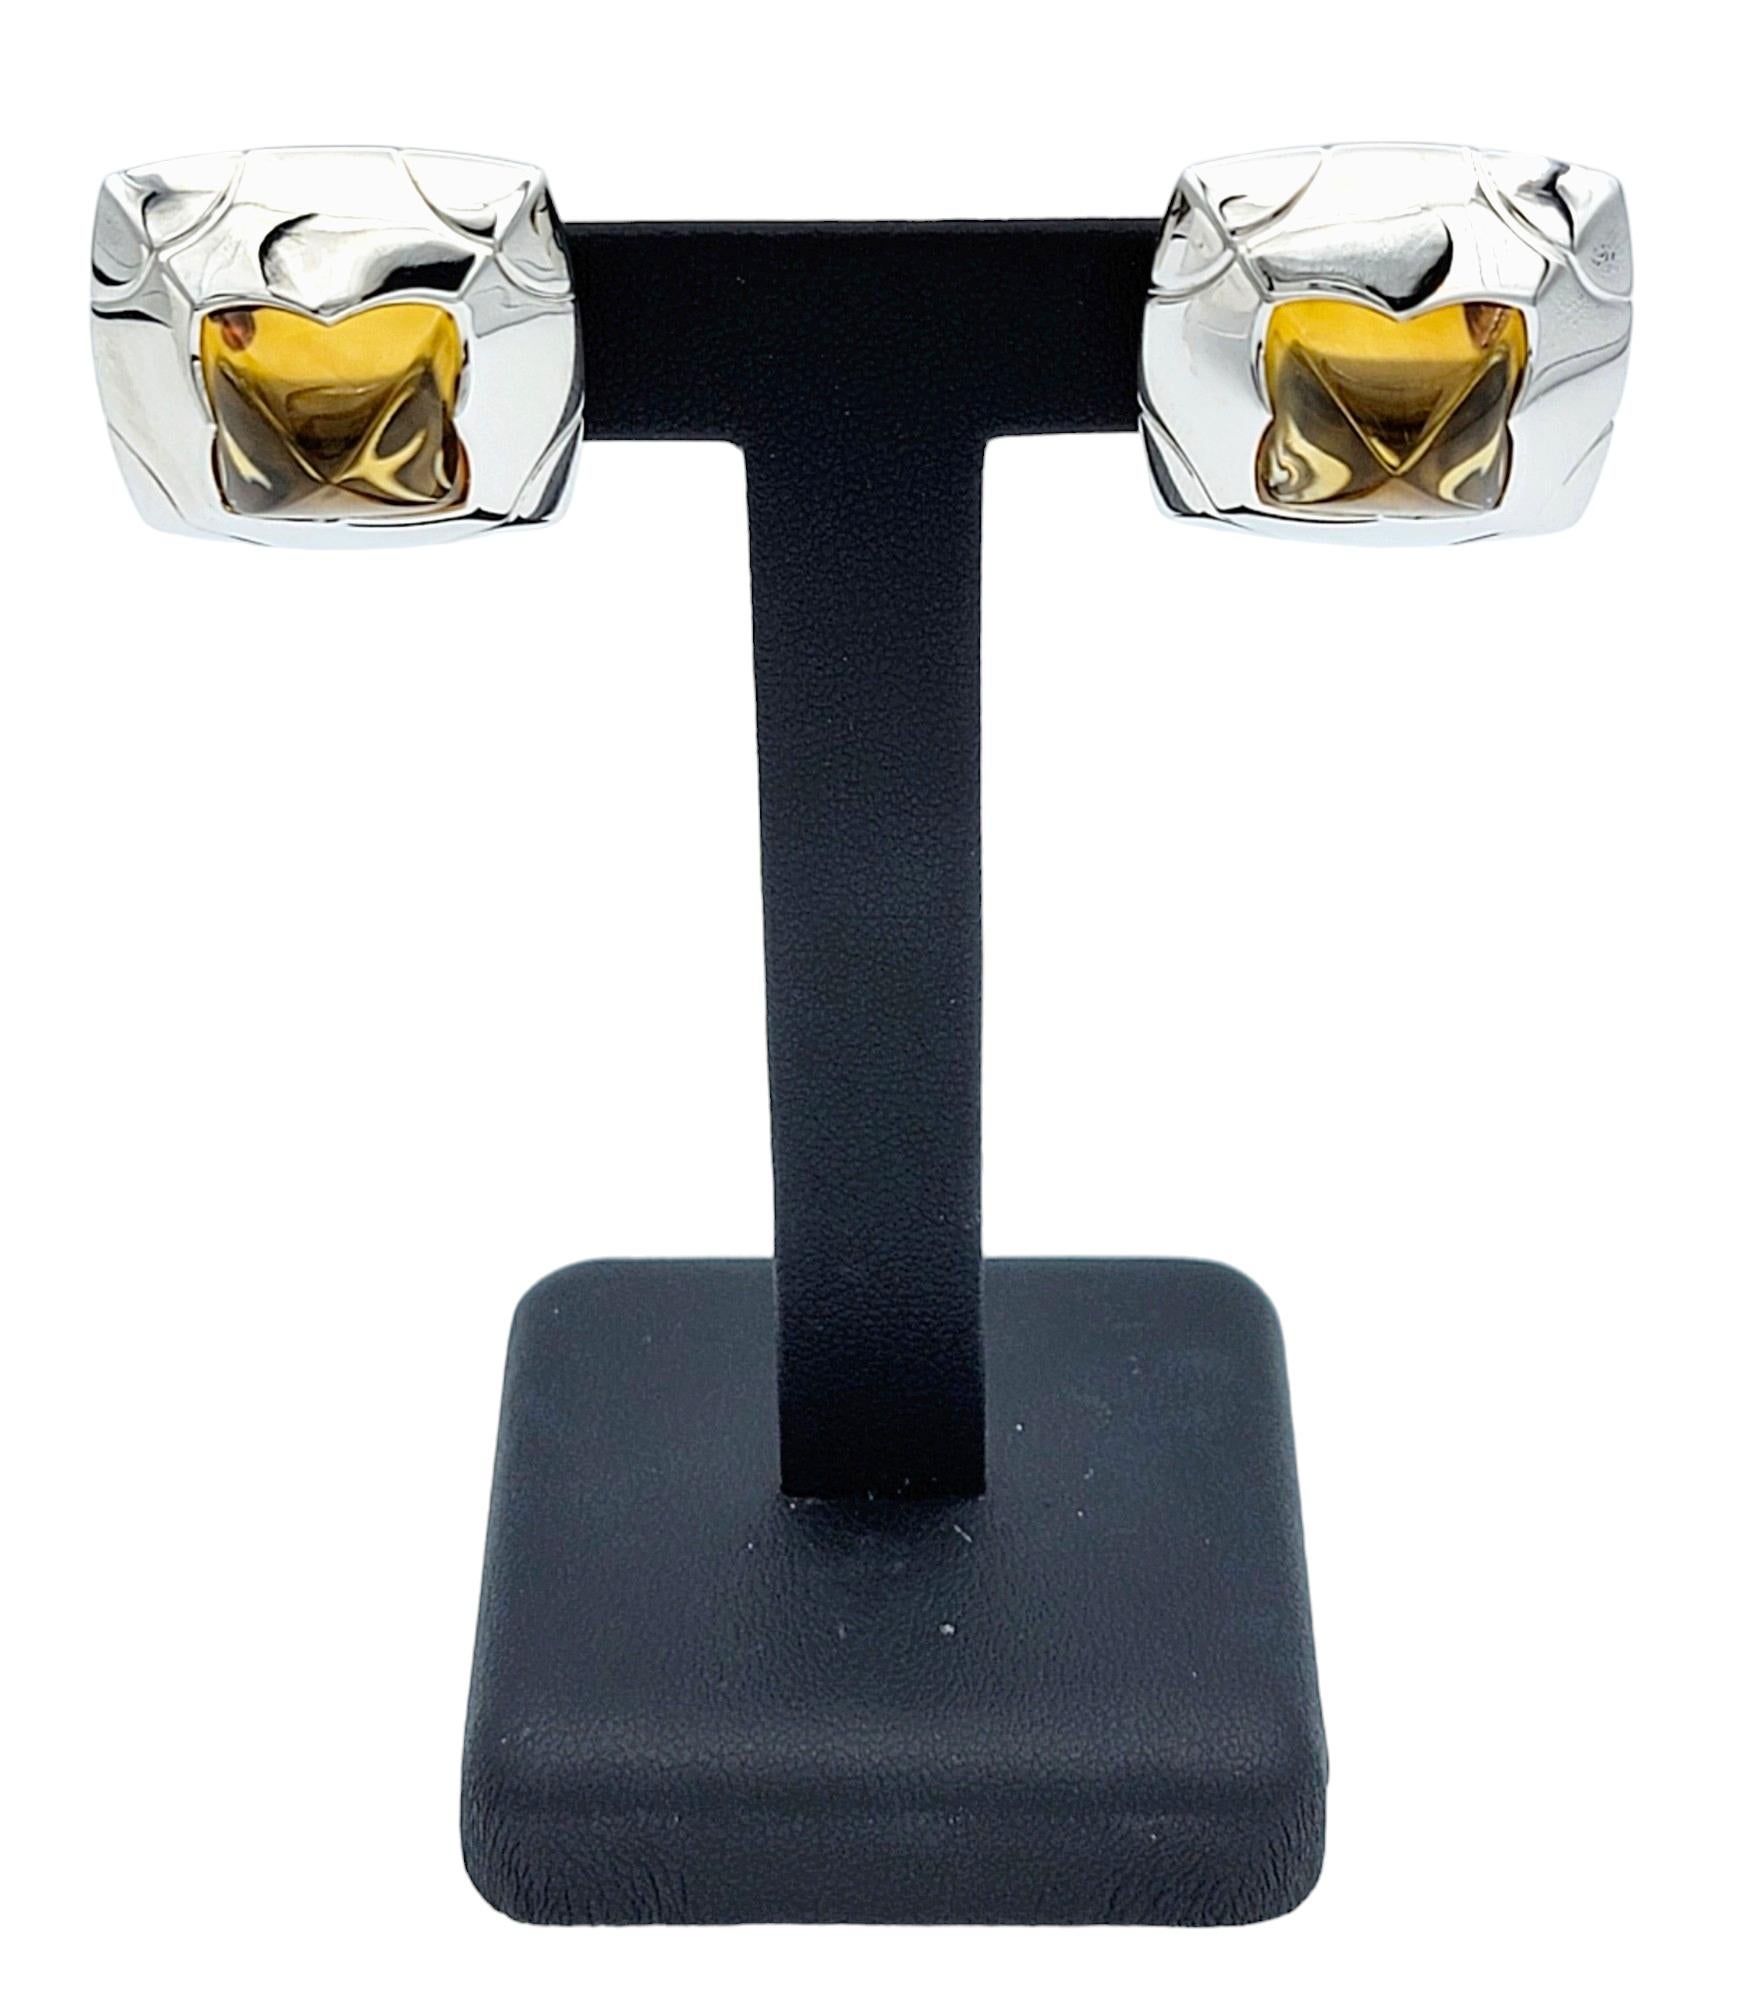 Bvlgari Pyramid Citrine Non-Pierced Stud Style Earrings in 18 Karat White Gold For Sale 2